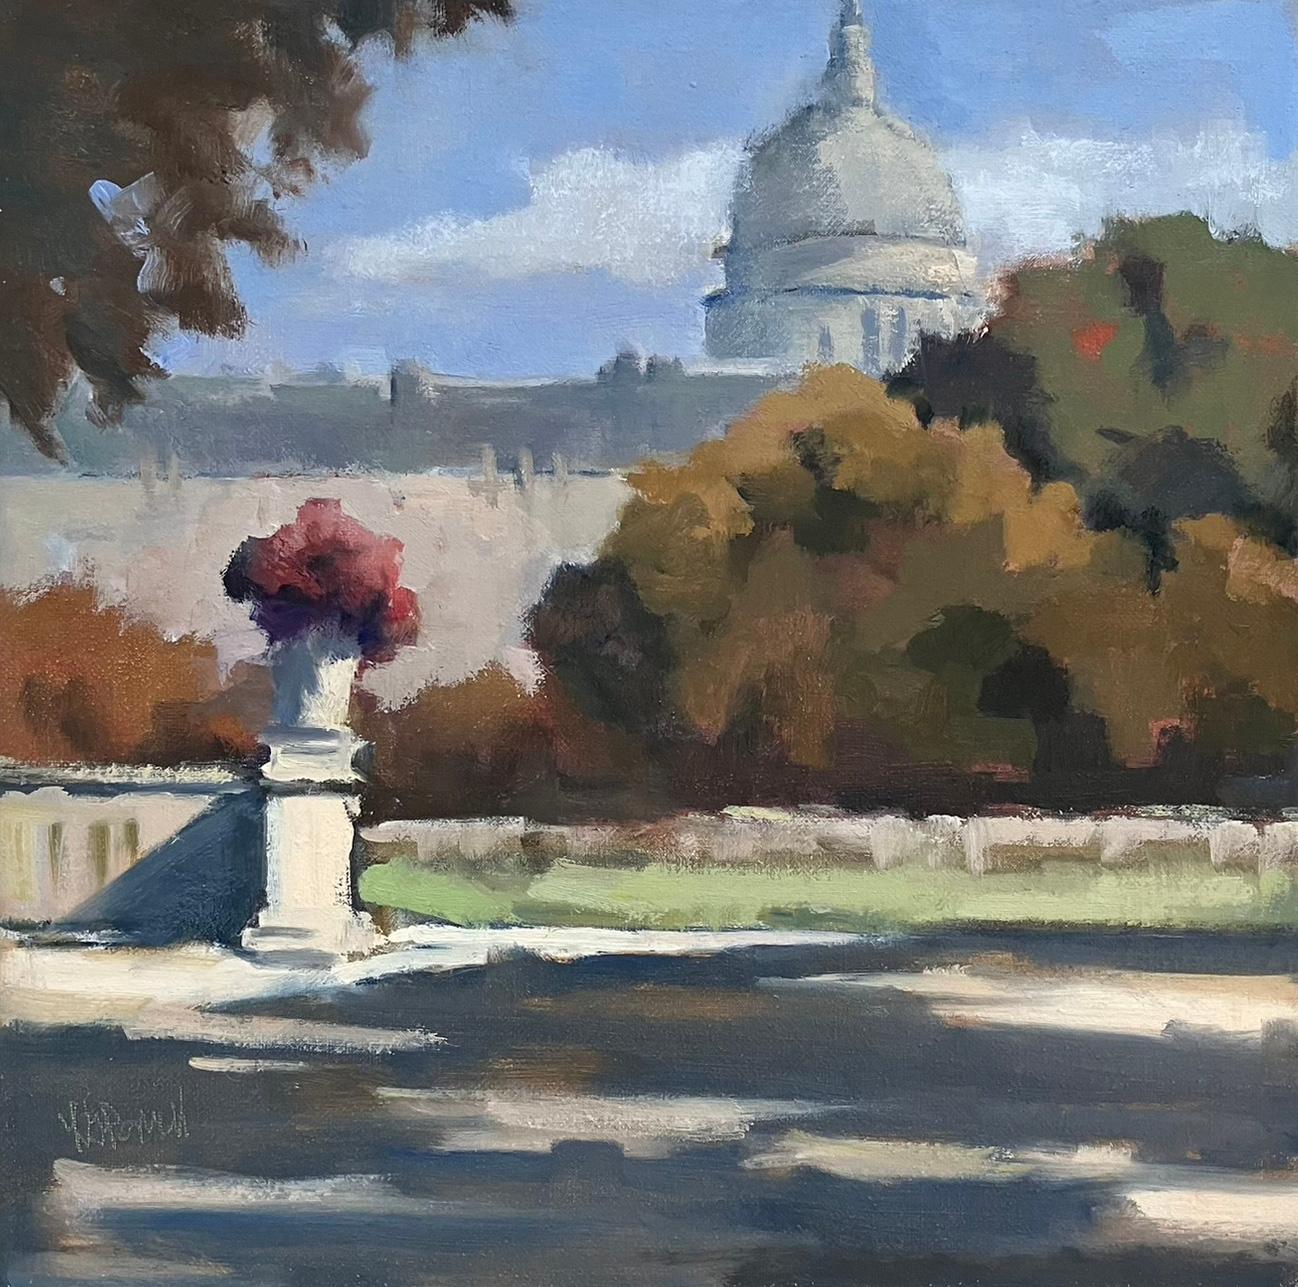 Pantheon, from Luxembourg Gardens by Lesley Powell, Oil on Canvas Parisian Scene